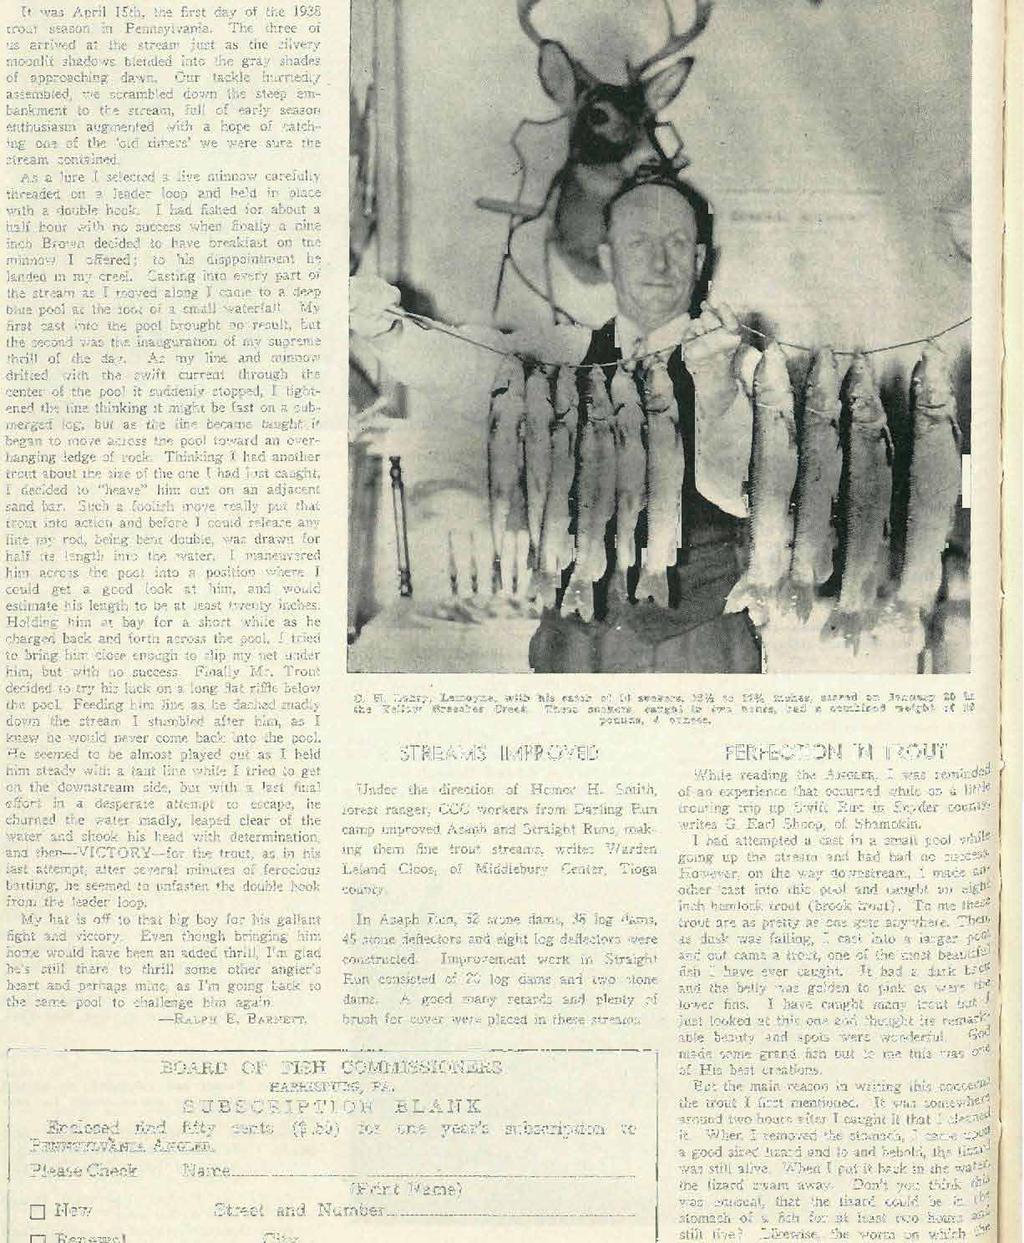 30 PENNSYLVANIA ANGLER APRIL A FIRST DAY THRILL It was April 15th, the first day of the 1938 trout season in Pennsylvania.